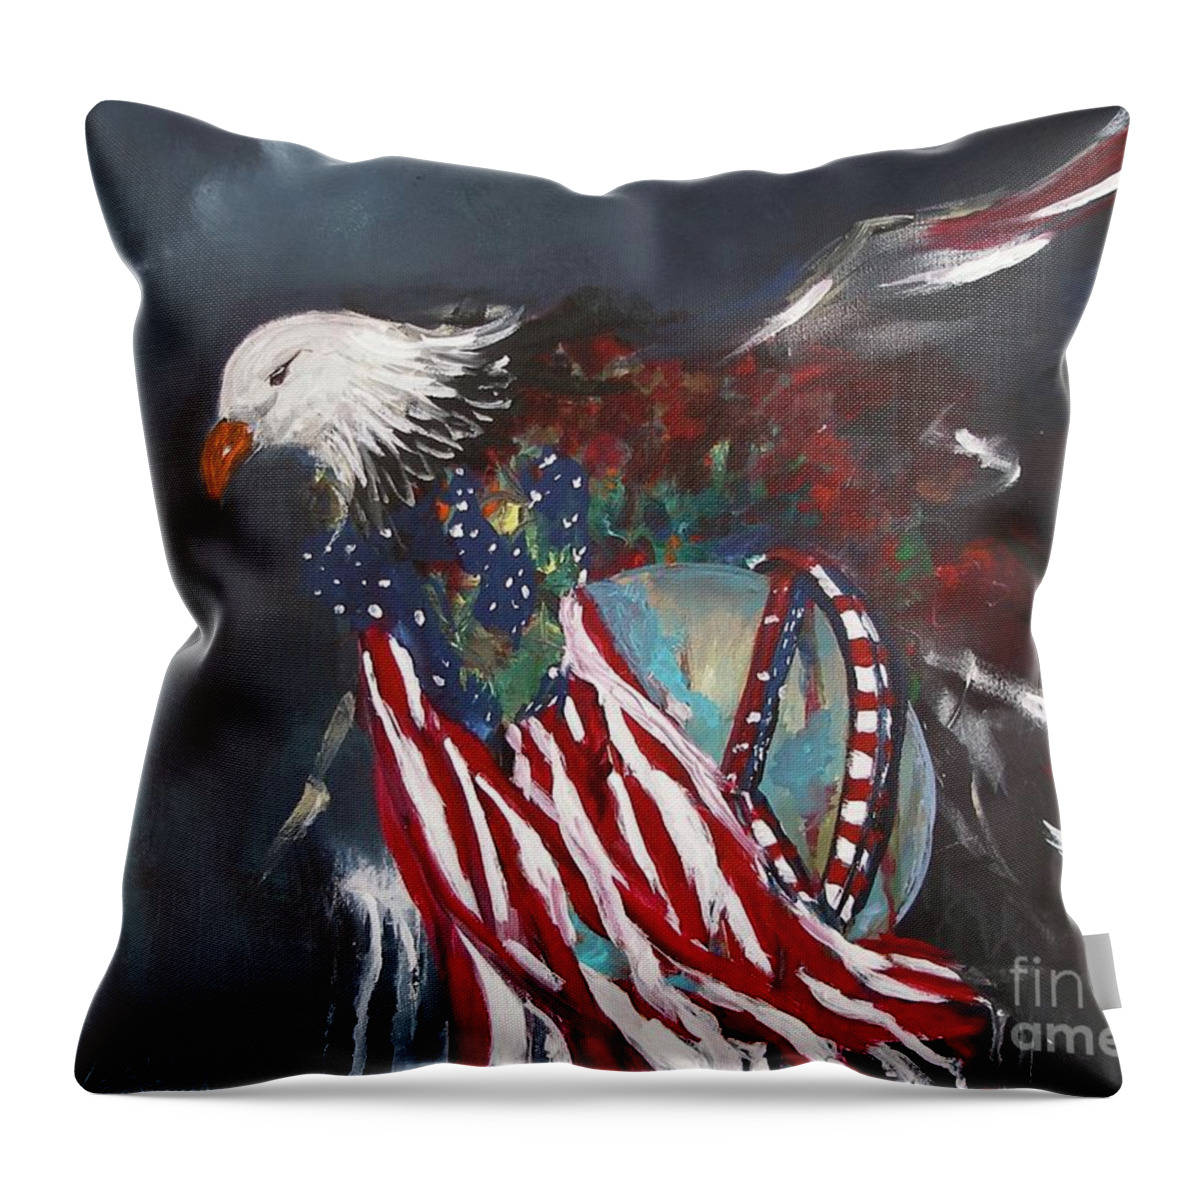 Freedom Rings Eagle American Flag Dark Red White Symbol Abstract Painting Print Peace World Earth Usa Bird Fly Wings Sky American Nation Pride Miroslaw Chelchowski American Eagle Throw Pillow featuring the painting Freedom Rings by Miroslaw Chelchowski